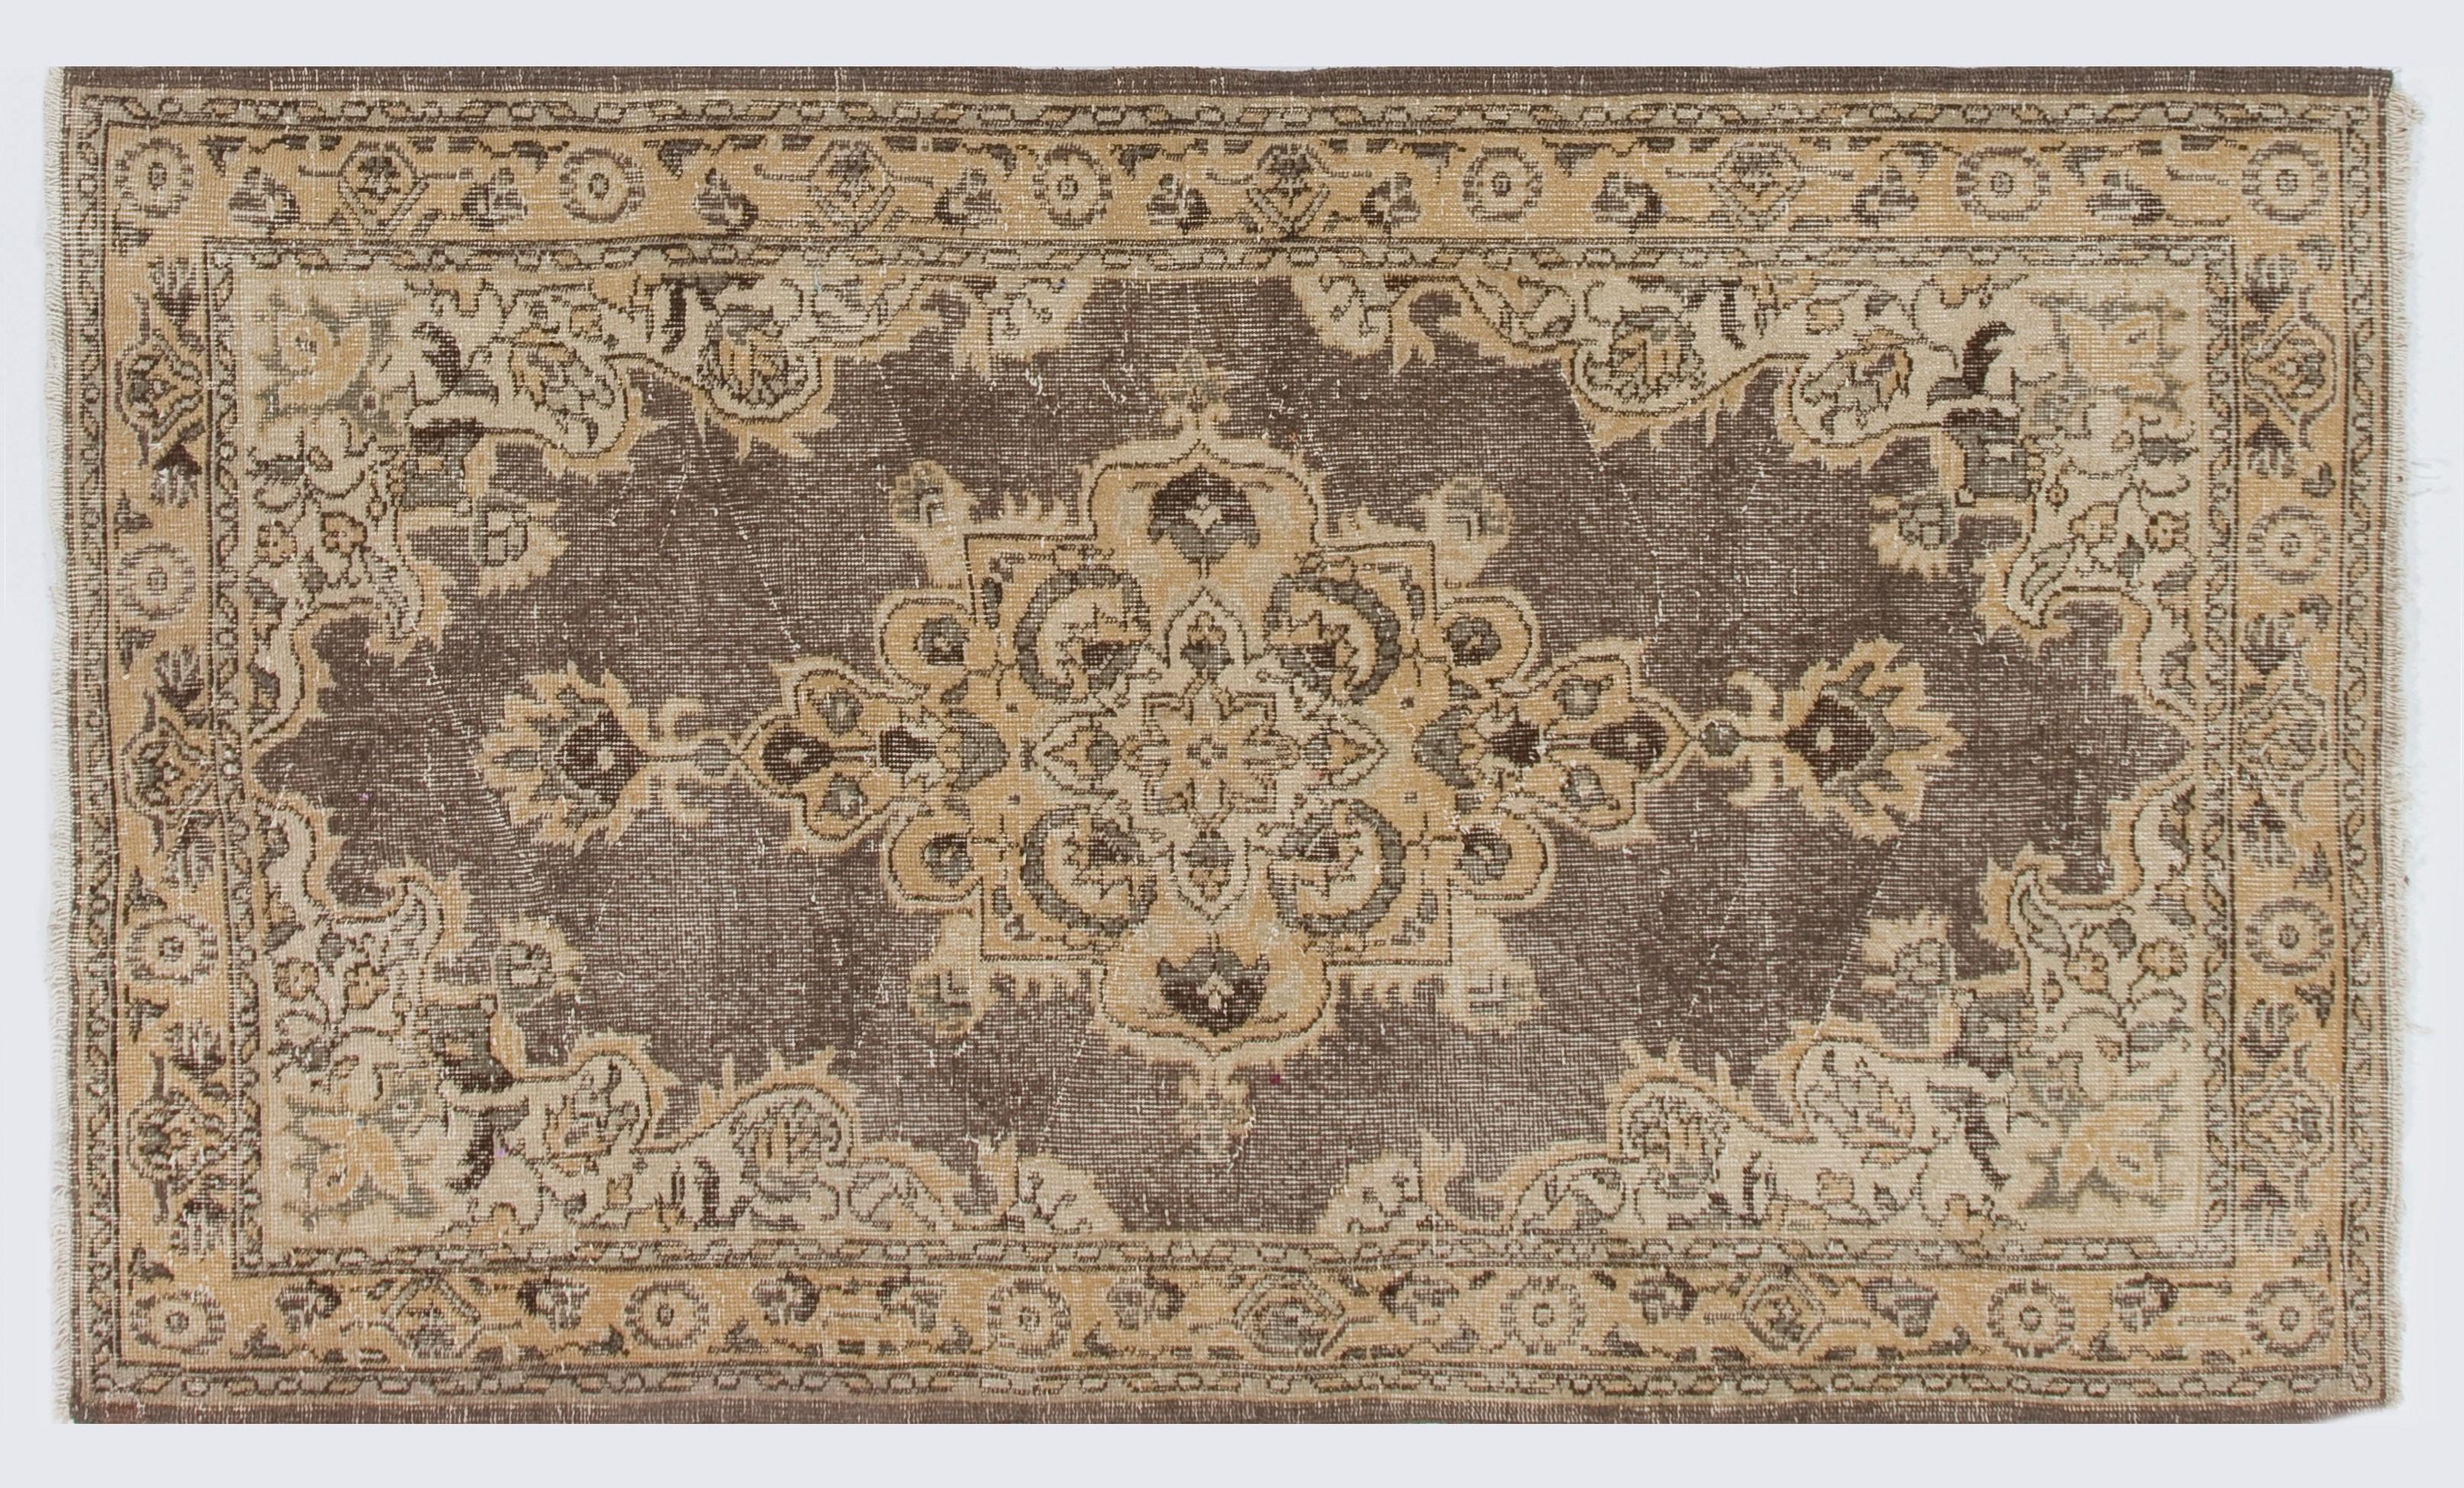 A vintage hand-knotted accent rug that was hand-knotted in the 1960s in Turkey, featuring a medallion design in earthy colors of beige, sand and brown. The rug has distressed low wool pile on cotton foundation, which gives it an antiquated look. It